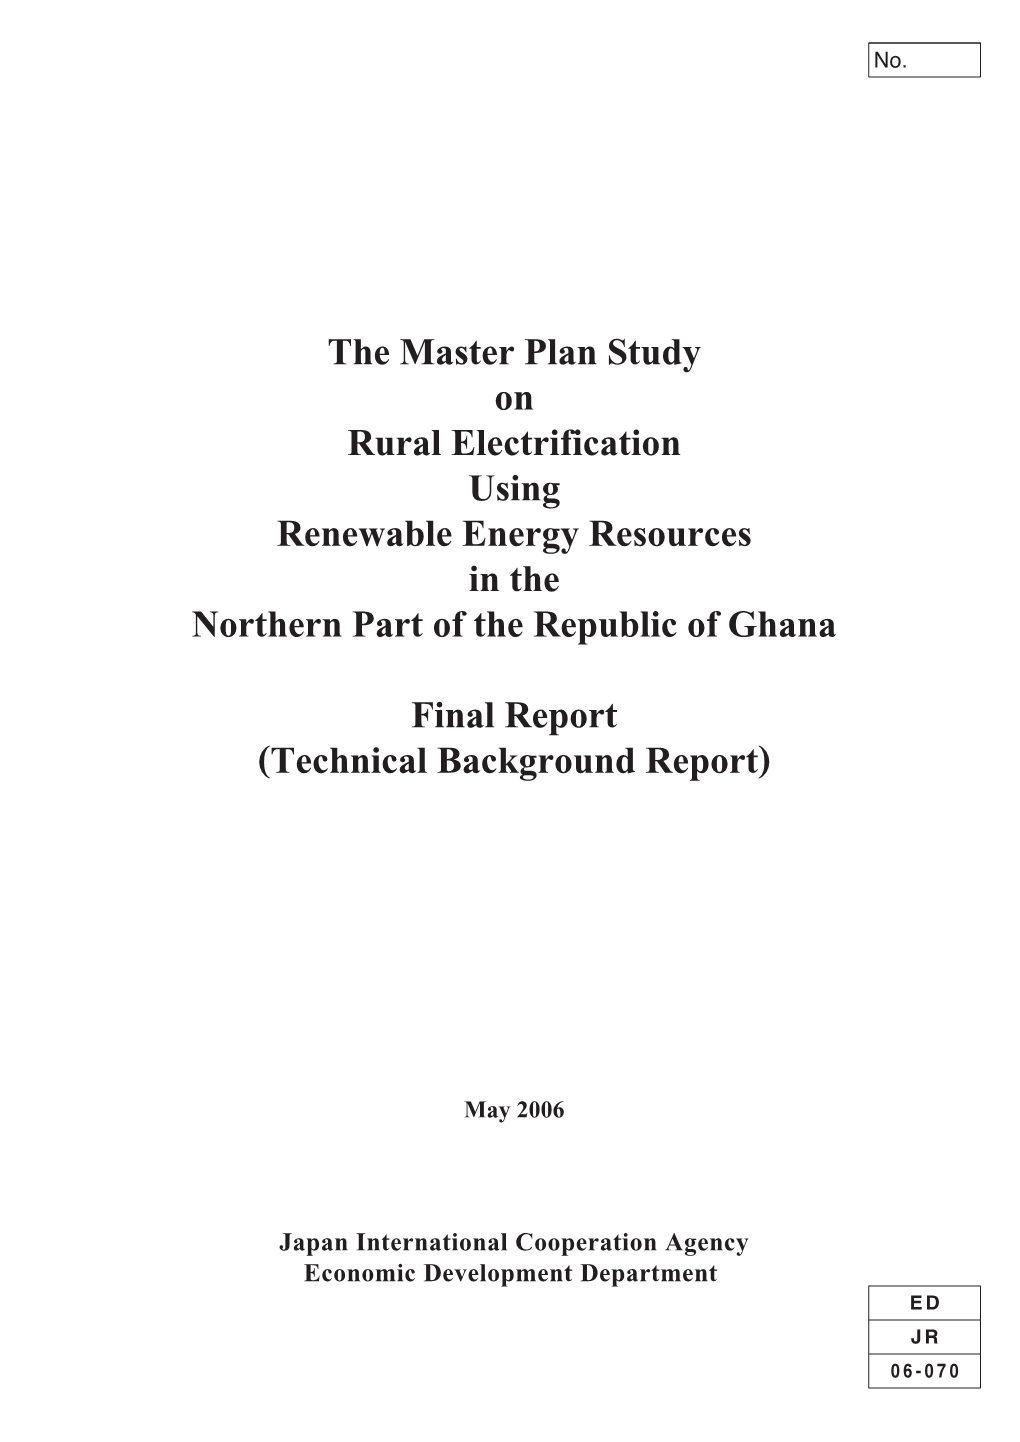 The Master Plan Study on Rural Electrification Using Renewable